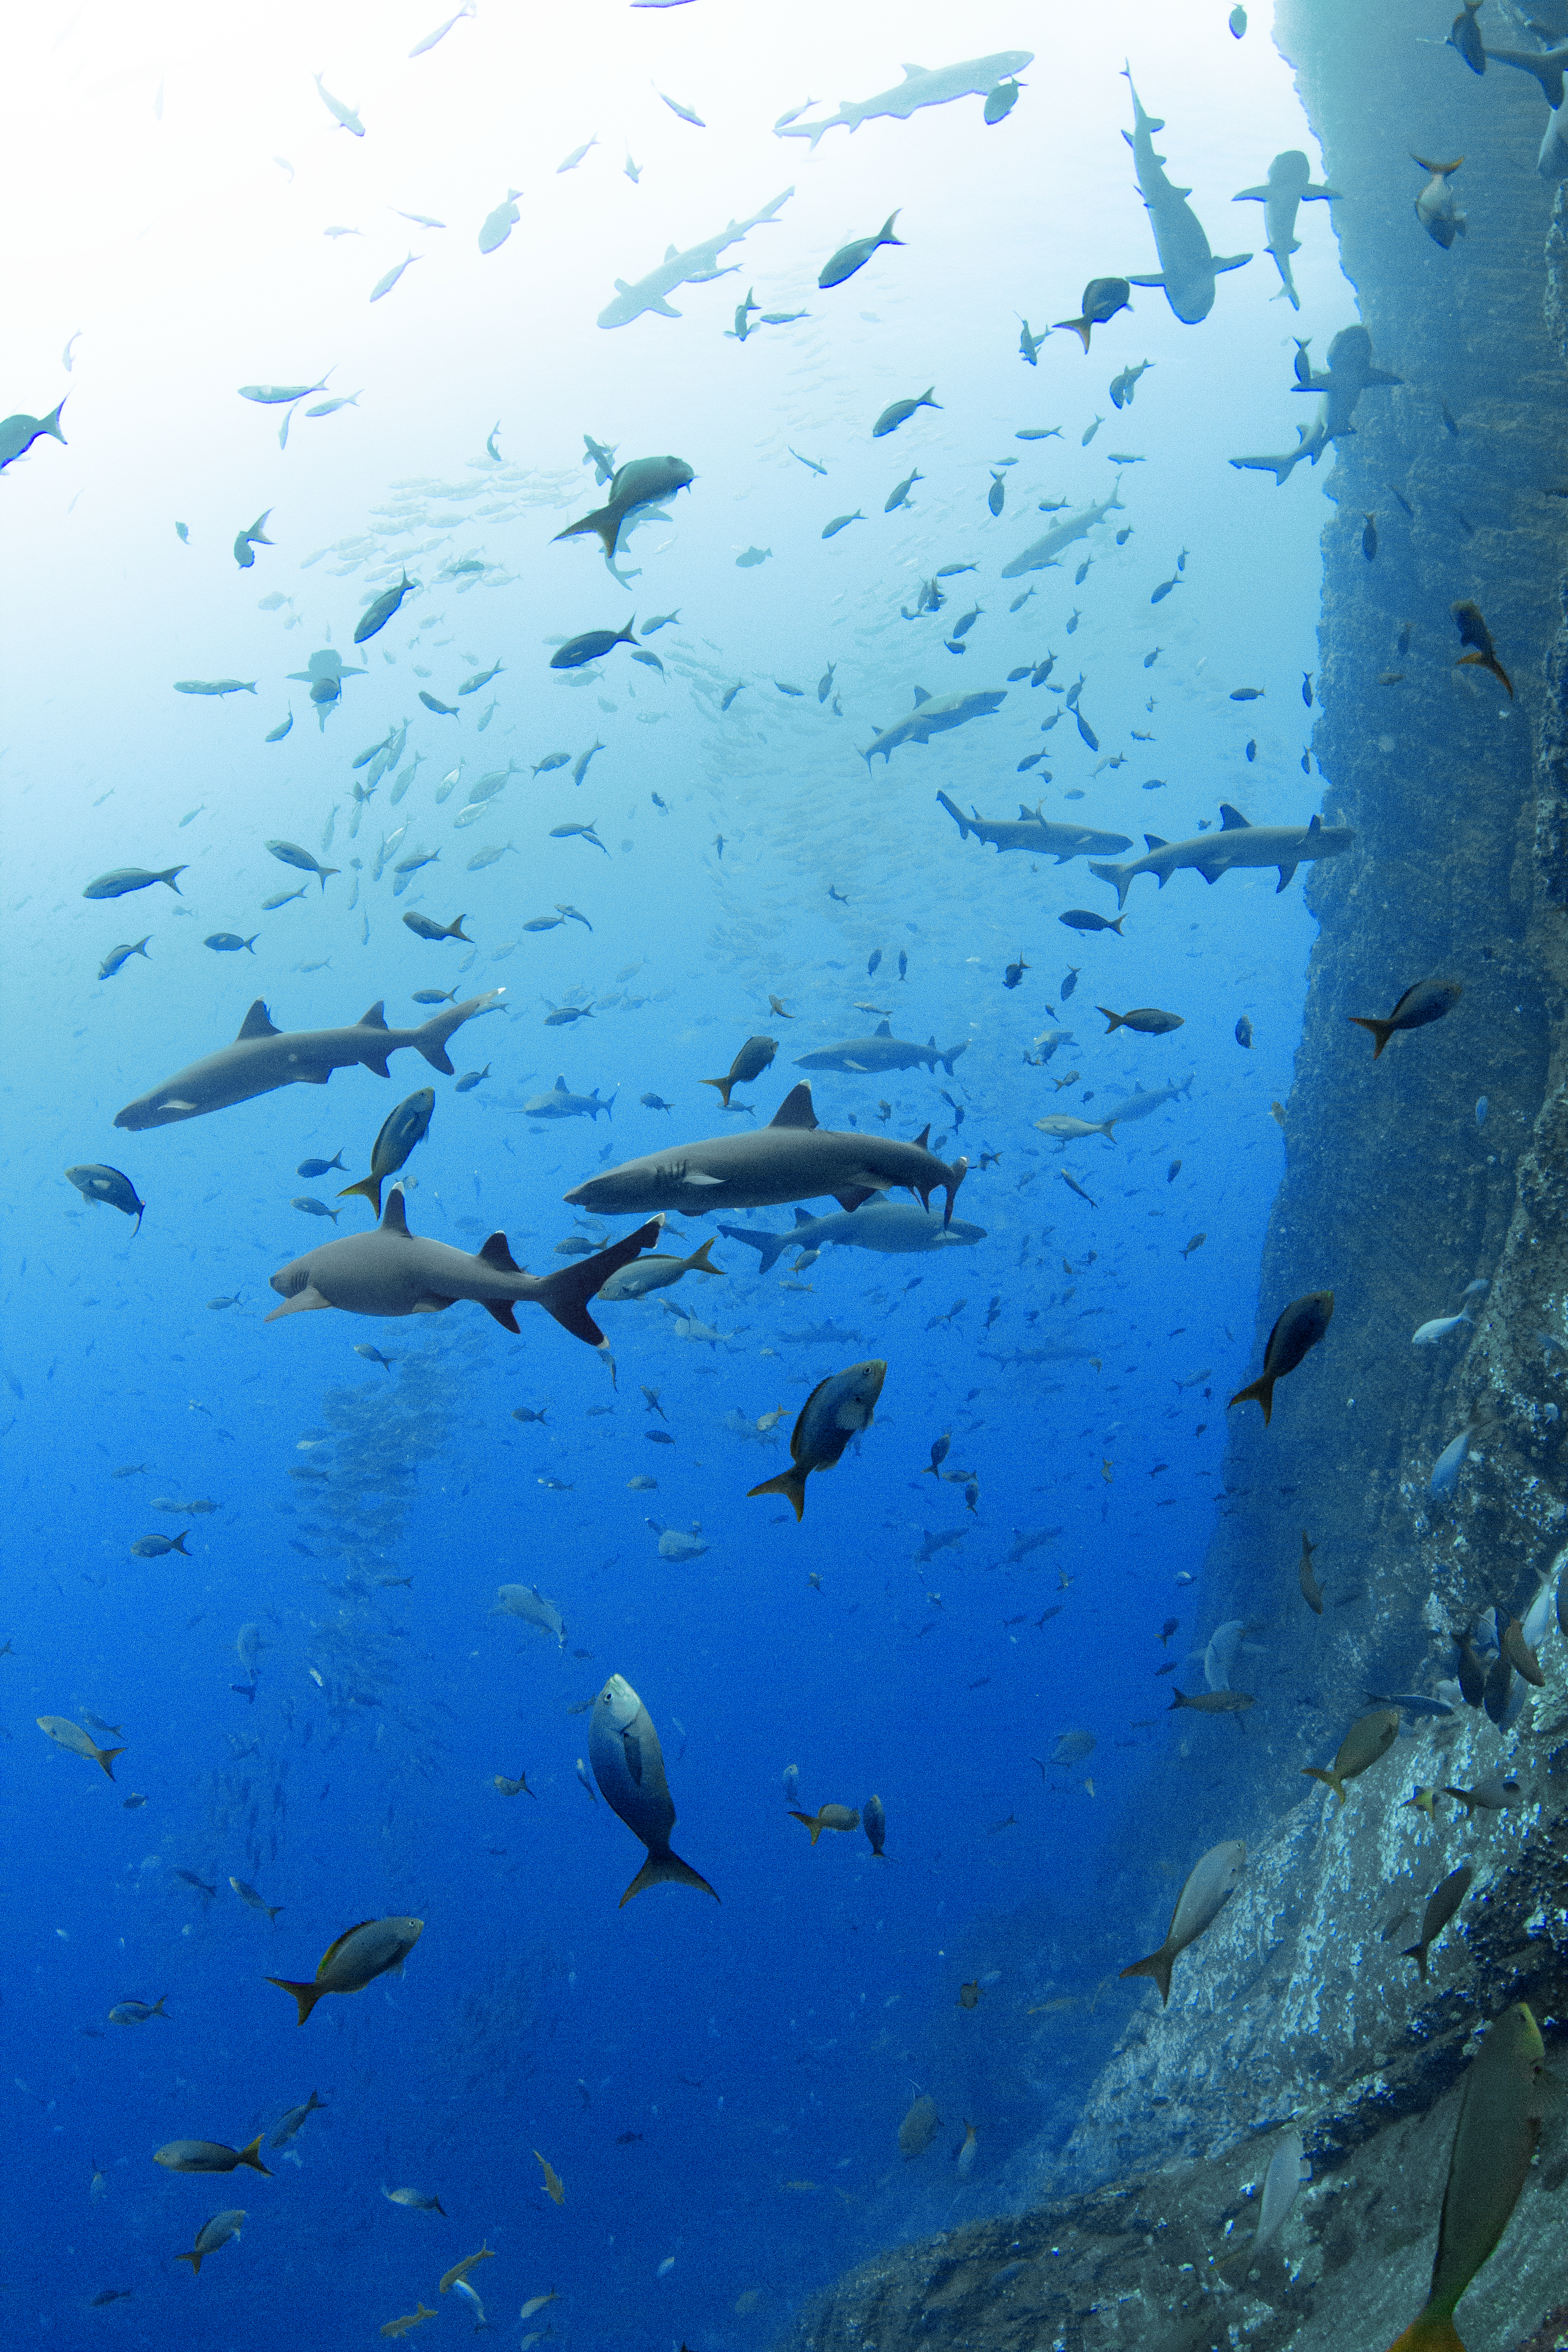 Whitetip reef sharks at Roca Partida. Photo by Kate Holt